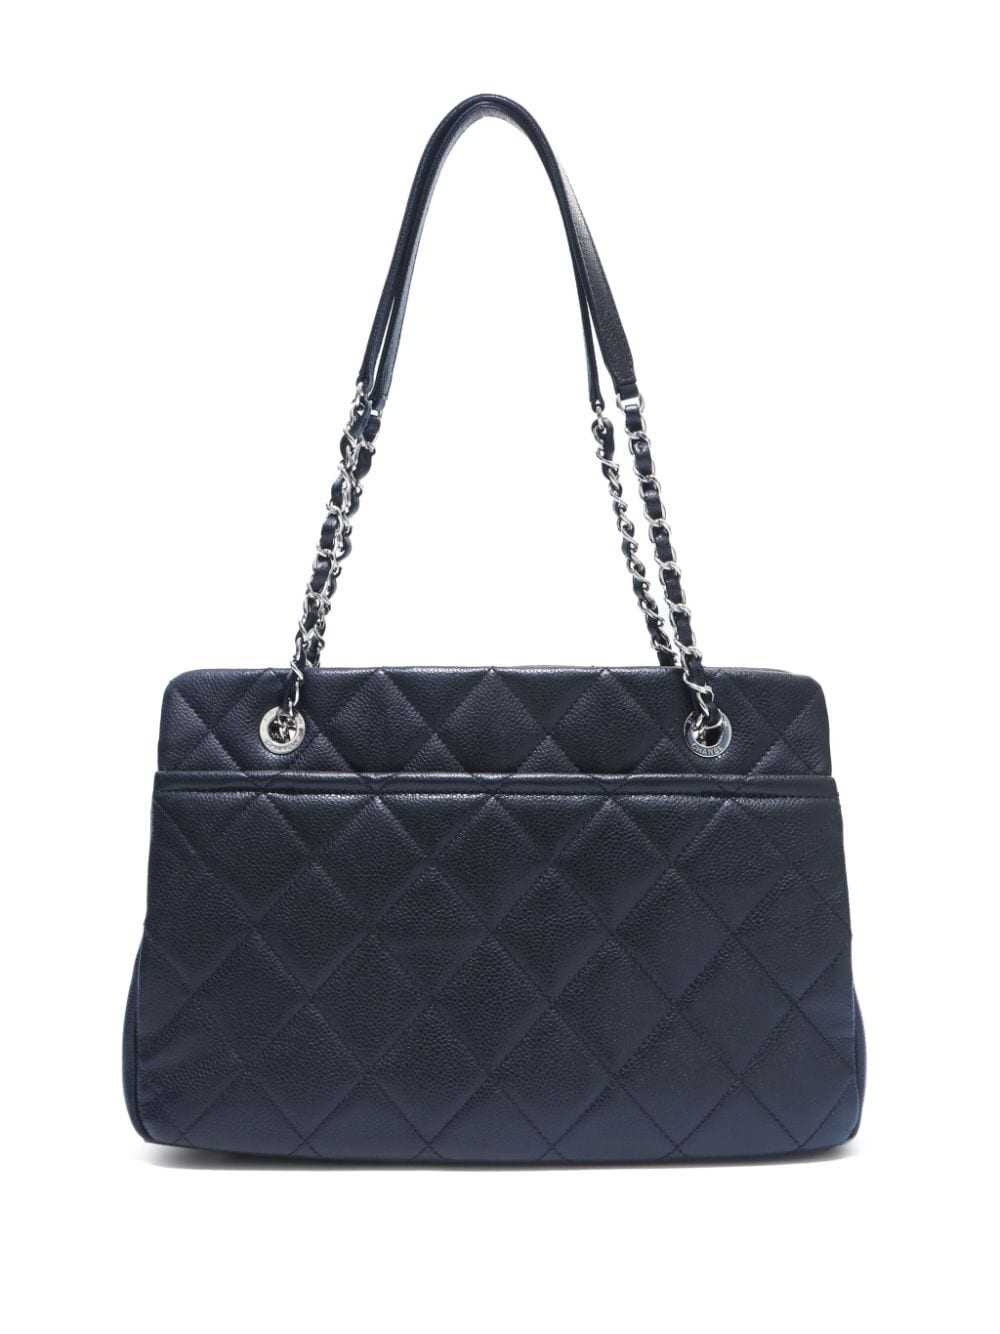 CHANEL Pre-Owned 2013 Timeless tote bag - Black - image 2